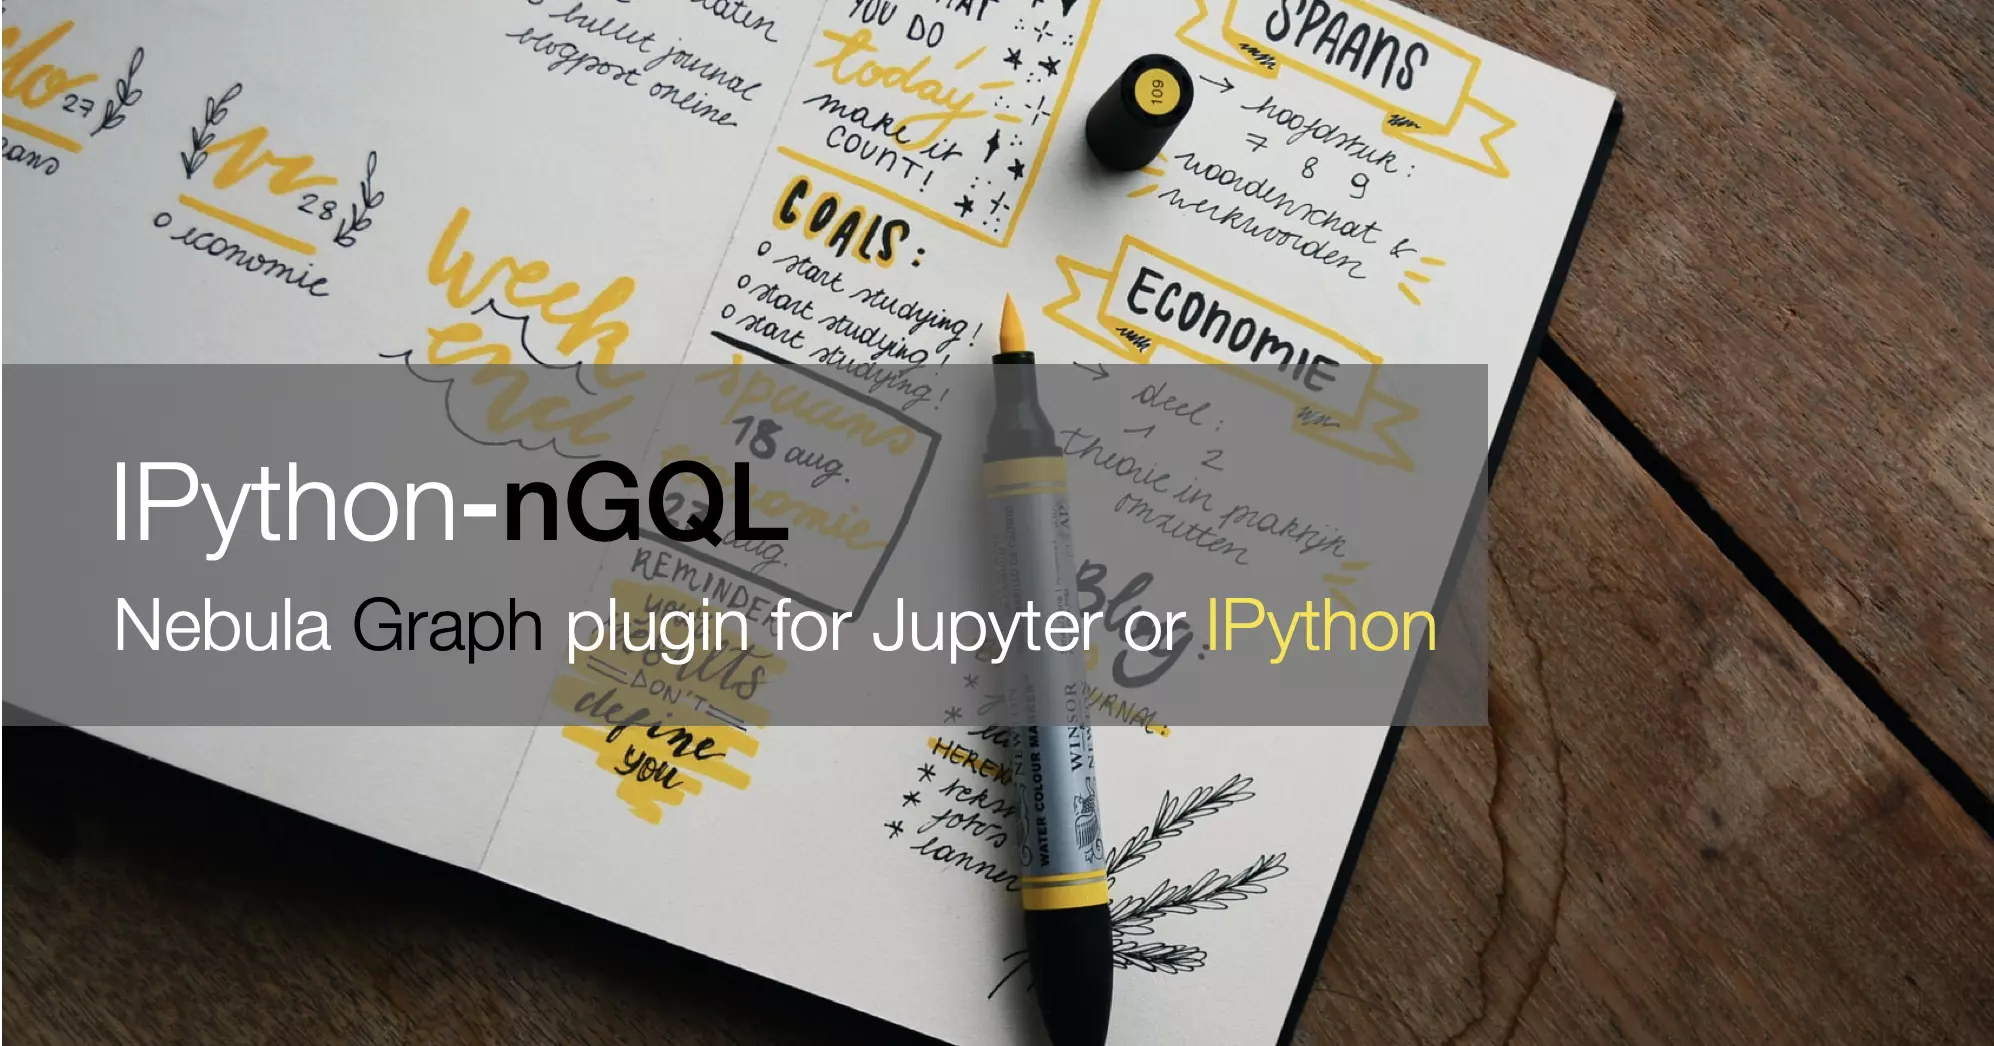 IPython-nGQL is a python package to extend the ability to connect Nebula Graph from your Jupyter Notebook or iPython. It's easier for data scientists to create, debug and share reusable and all-in-one Jupyter Notebooks with Nebula Graph interaction embedded.